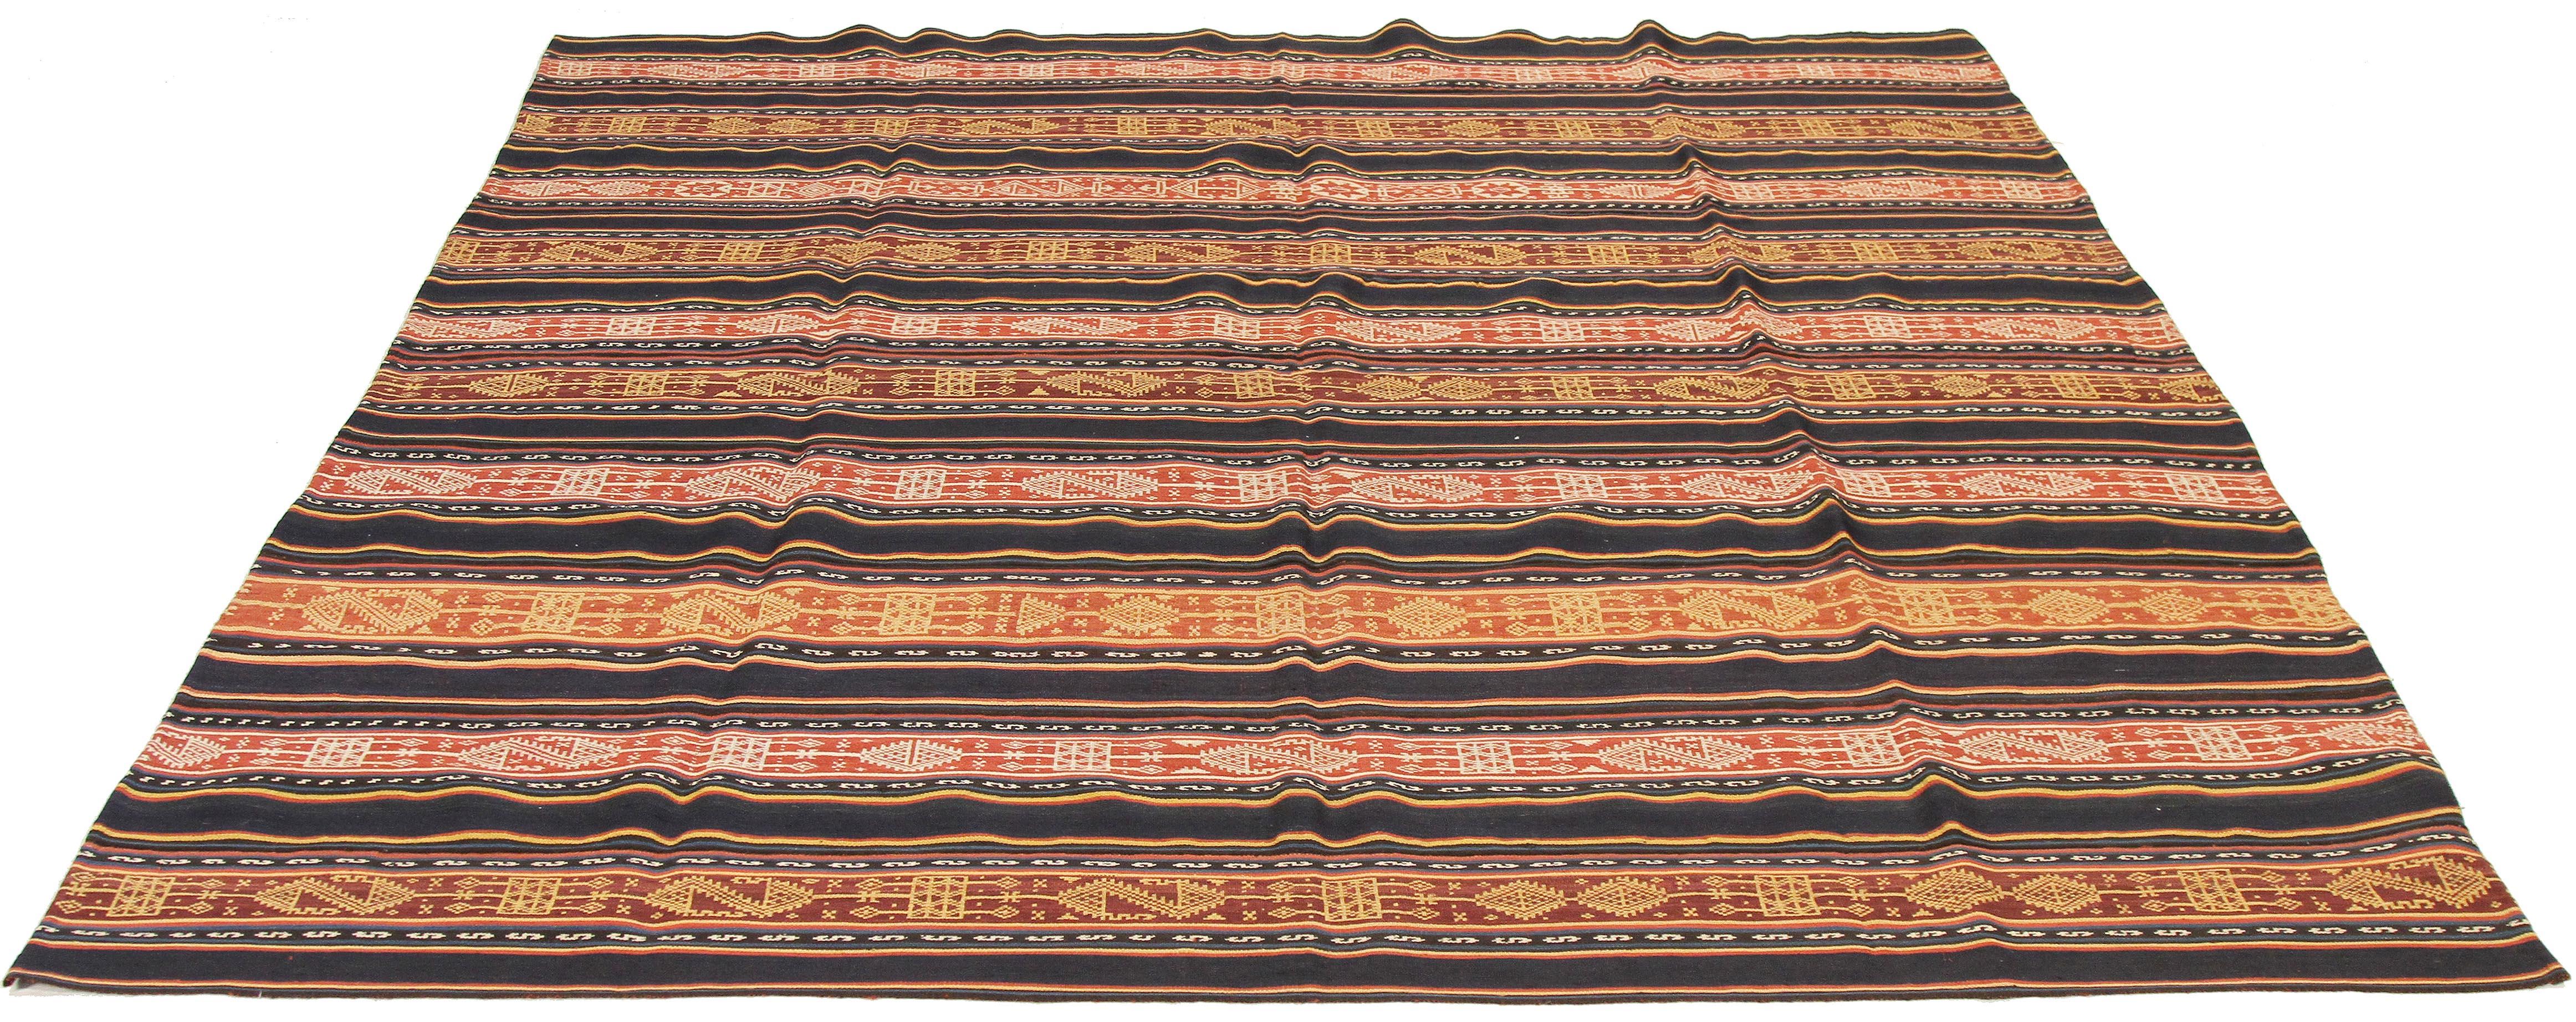 Antique Persian rug handwoven from the finest sheep’s wool and colored with all-natural vegetable dyes that are safe for humans and pets. It’s a traditional Jajim flat-weave design featuring tribal details on colored stripes. It’s a stunning piece